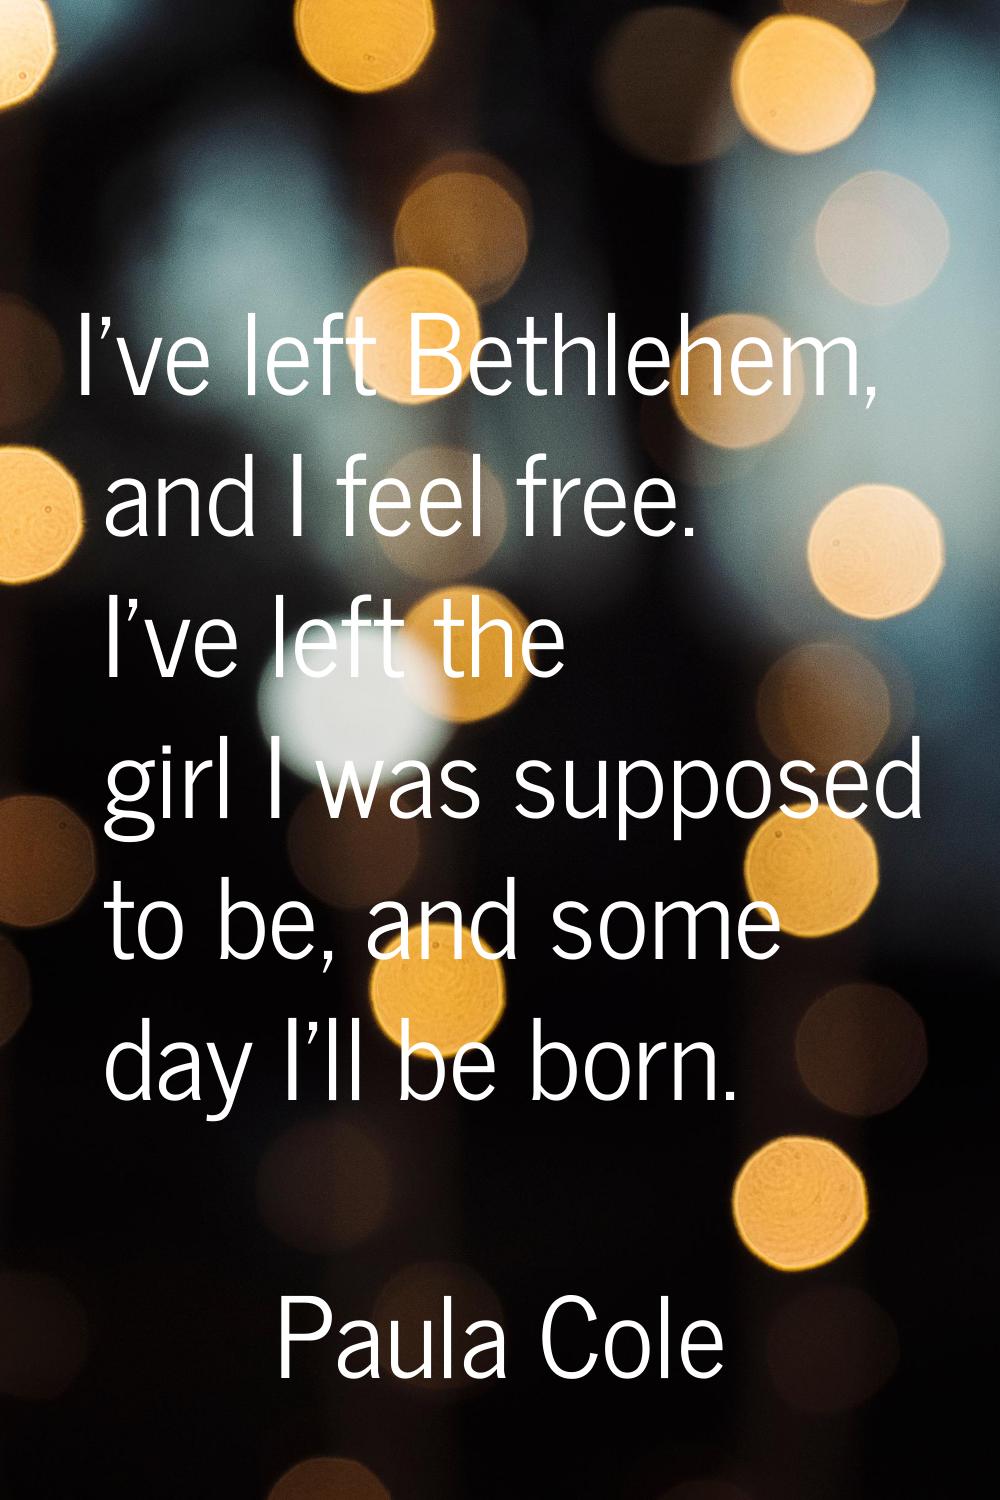 I've left Bethlehem, and I feel free. I've left the girl I was supposed to be, and some day I'll be